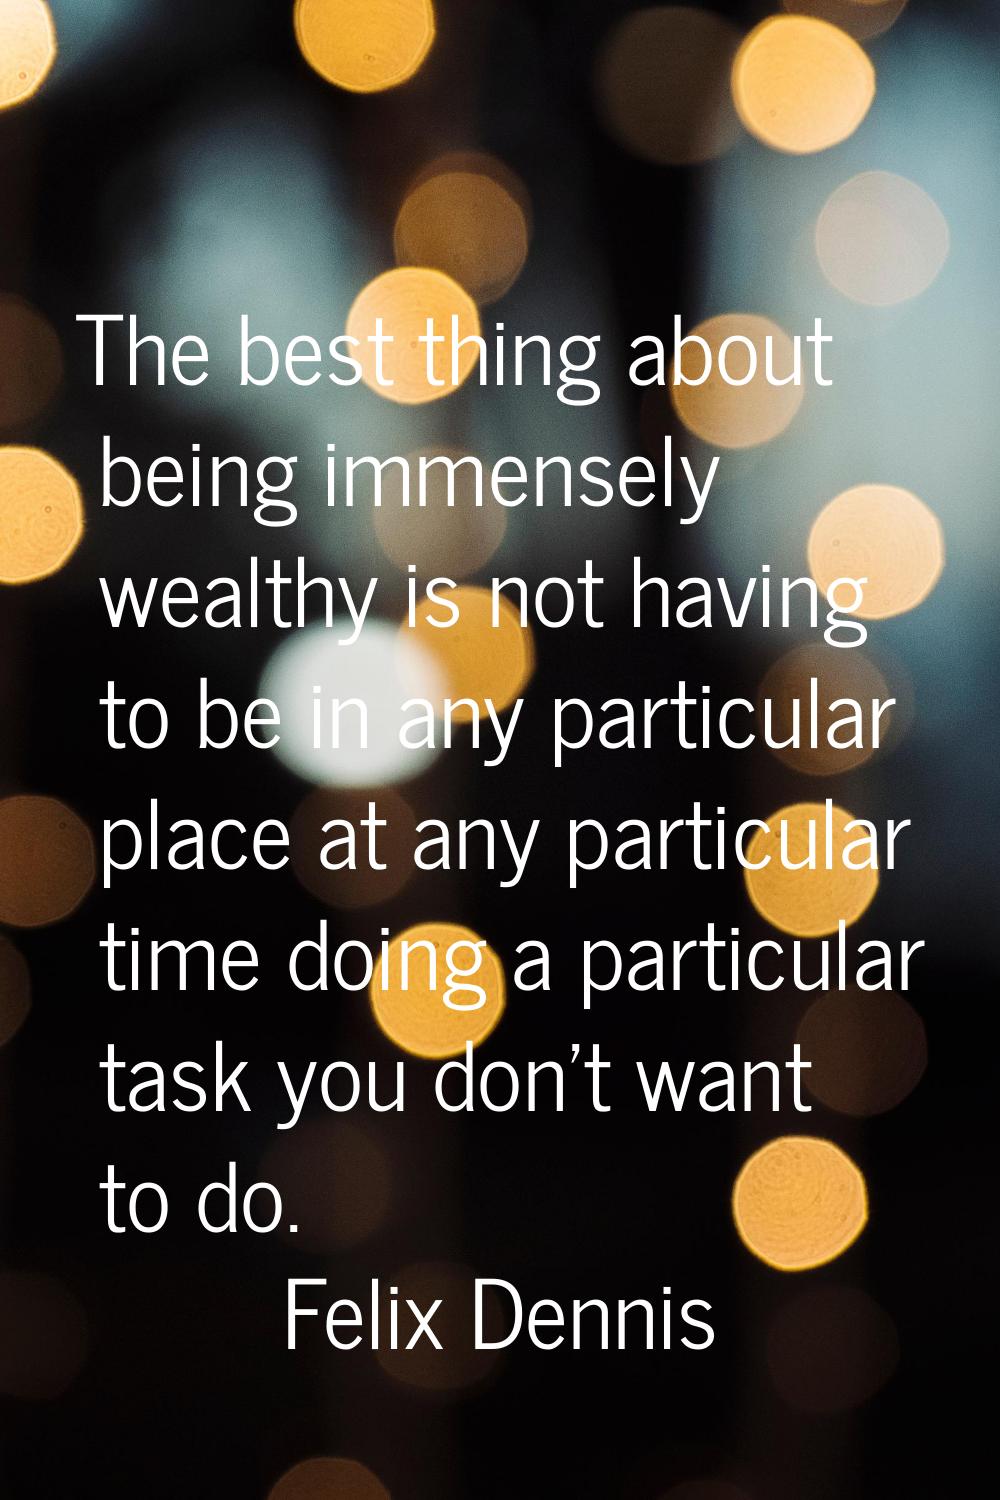 The best thing about being immensely wealthy is not having to be in any particular place at any par